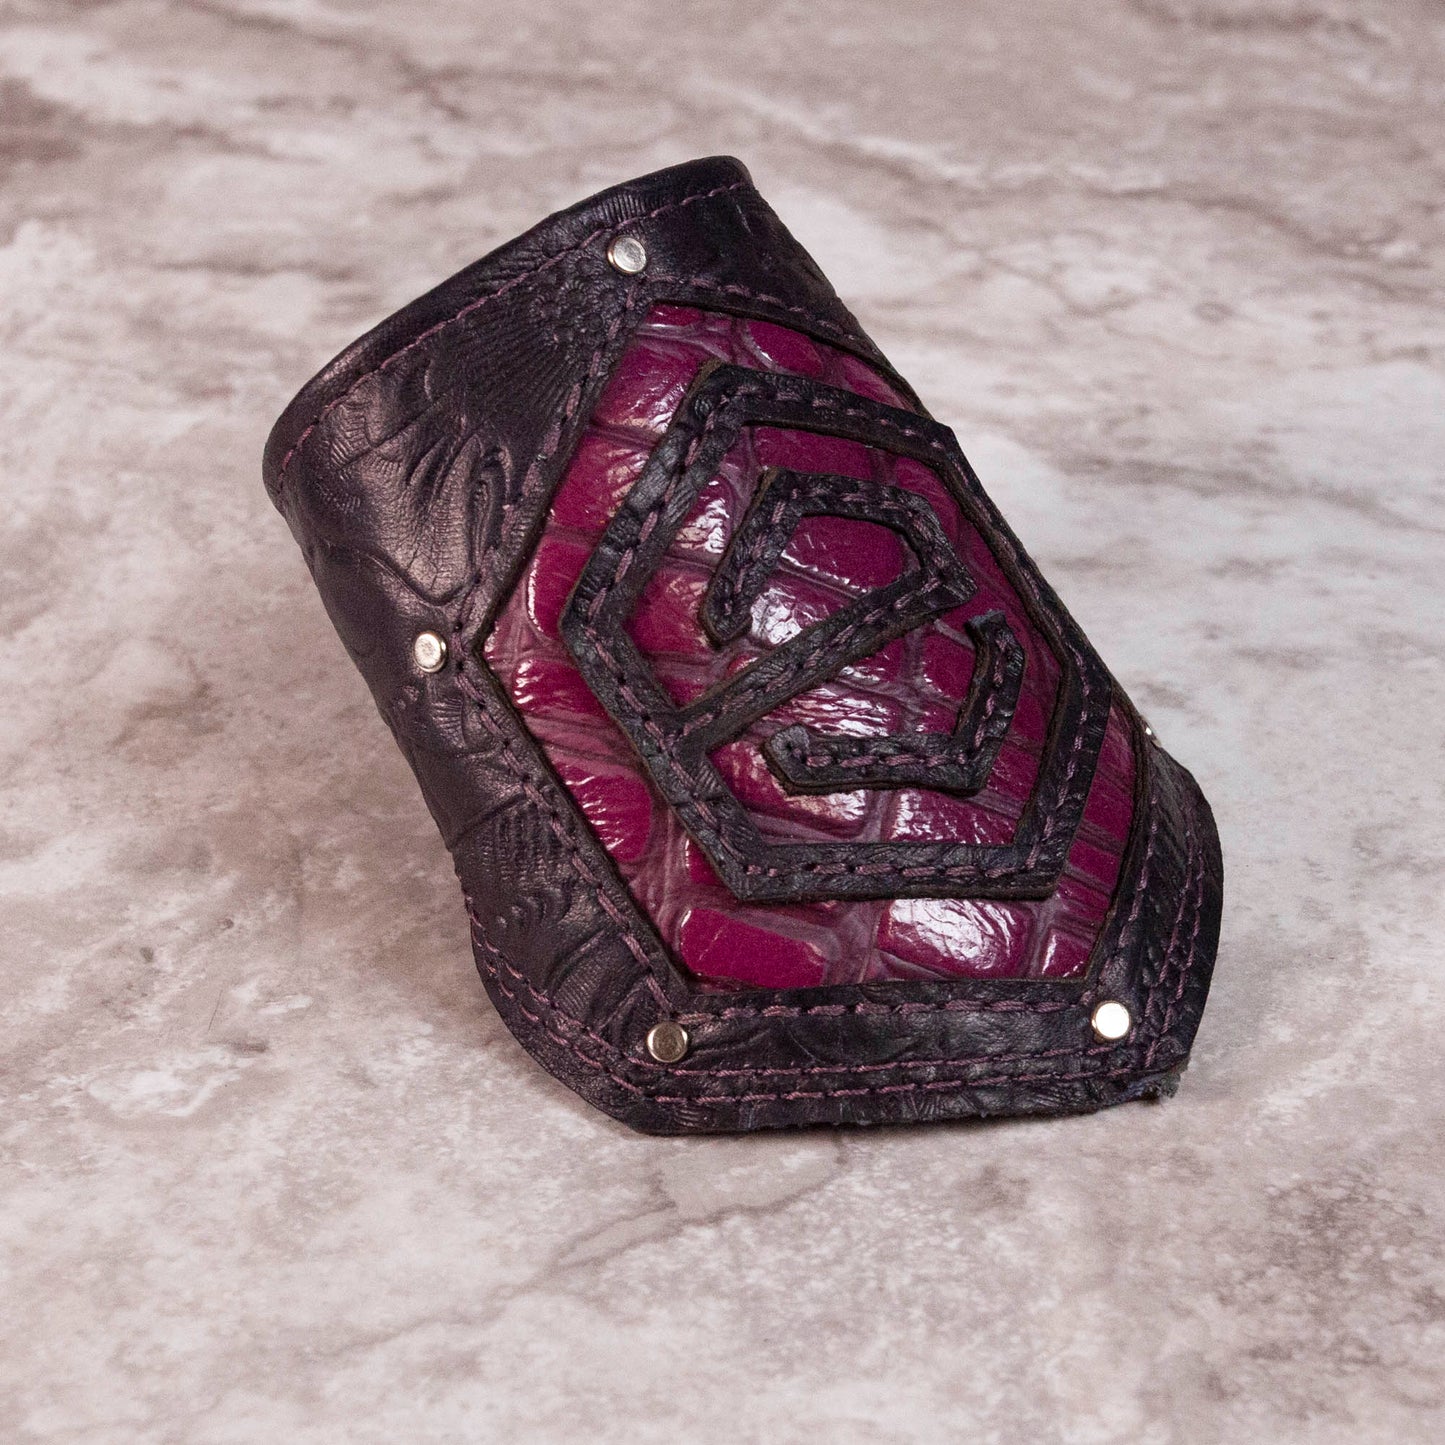 eArena MetaPhysical Cuff | The Royal